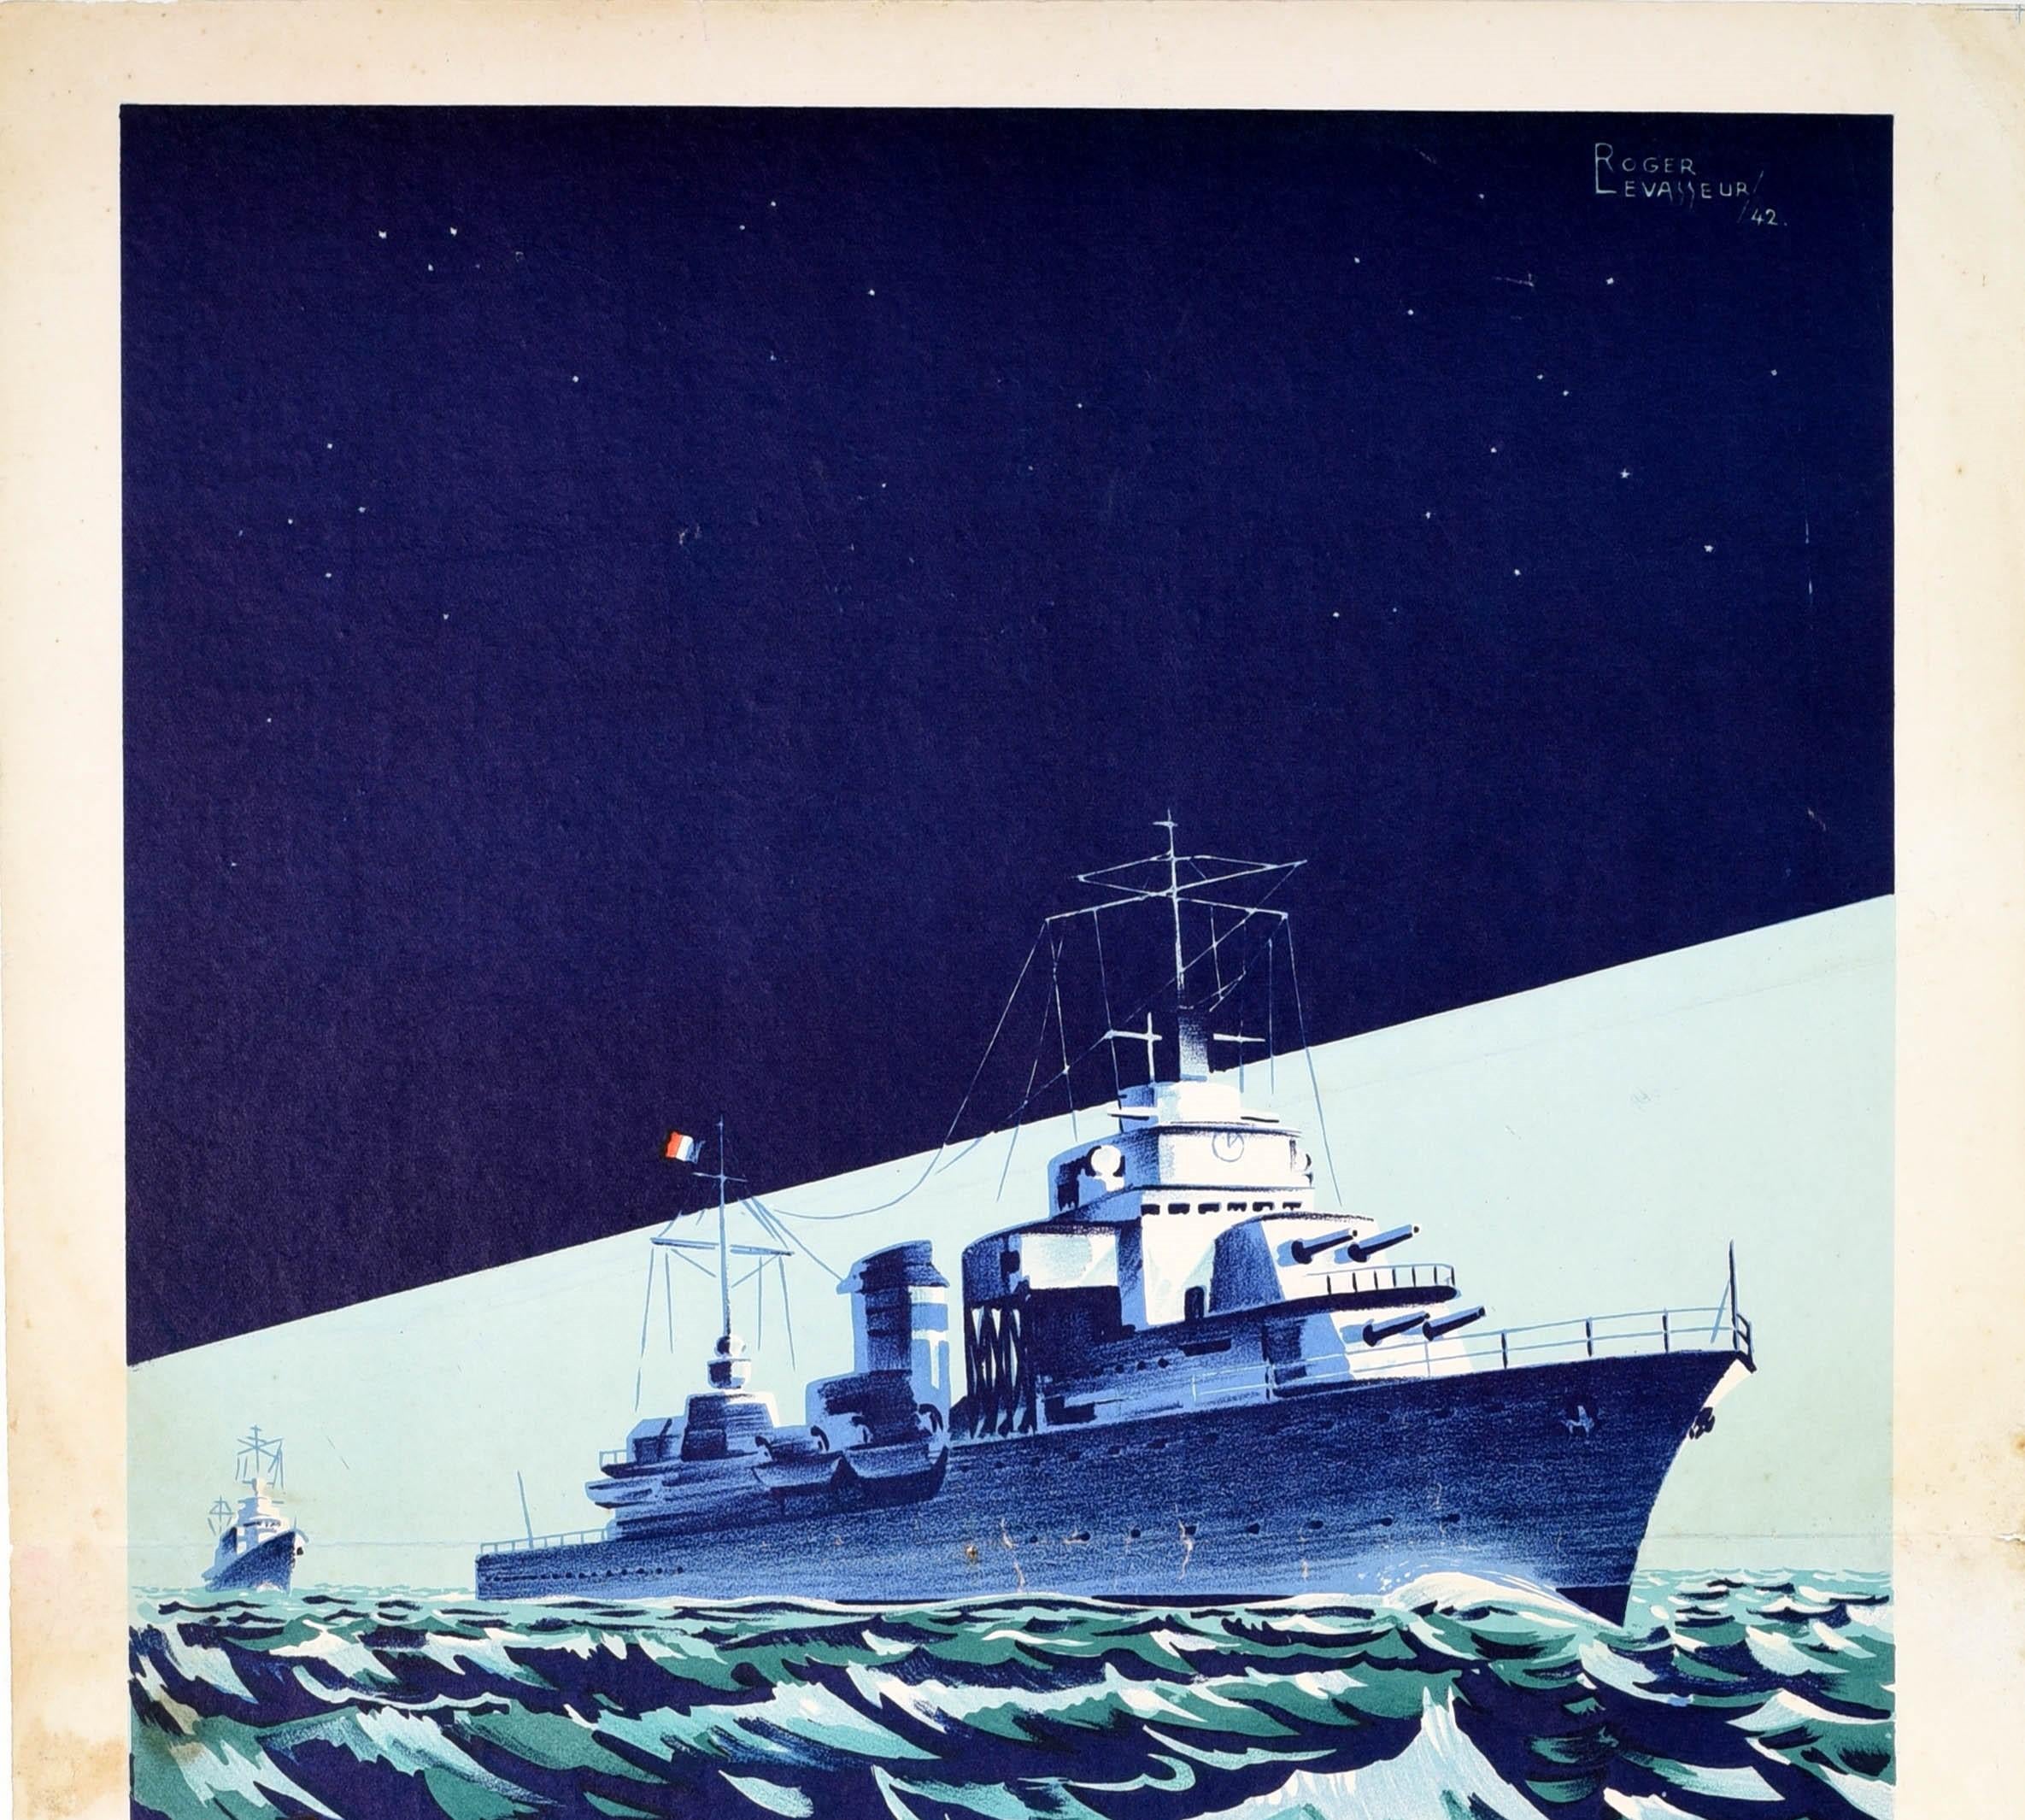 Original vintage World War Two naval military recruitment poster Engagez-vous dans la Marine / Join the Navy featuring dynamic artwork of a warship at sea with the title in bold red letters below. Printed by Gaston Maillet & Co. Good condition,